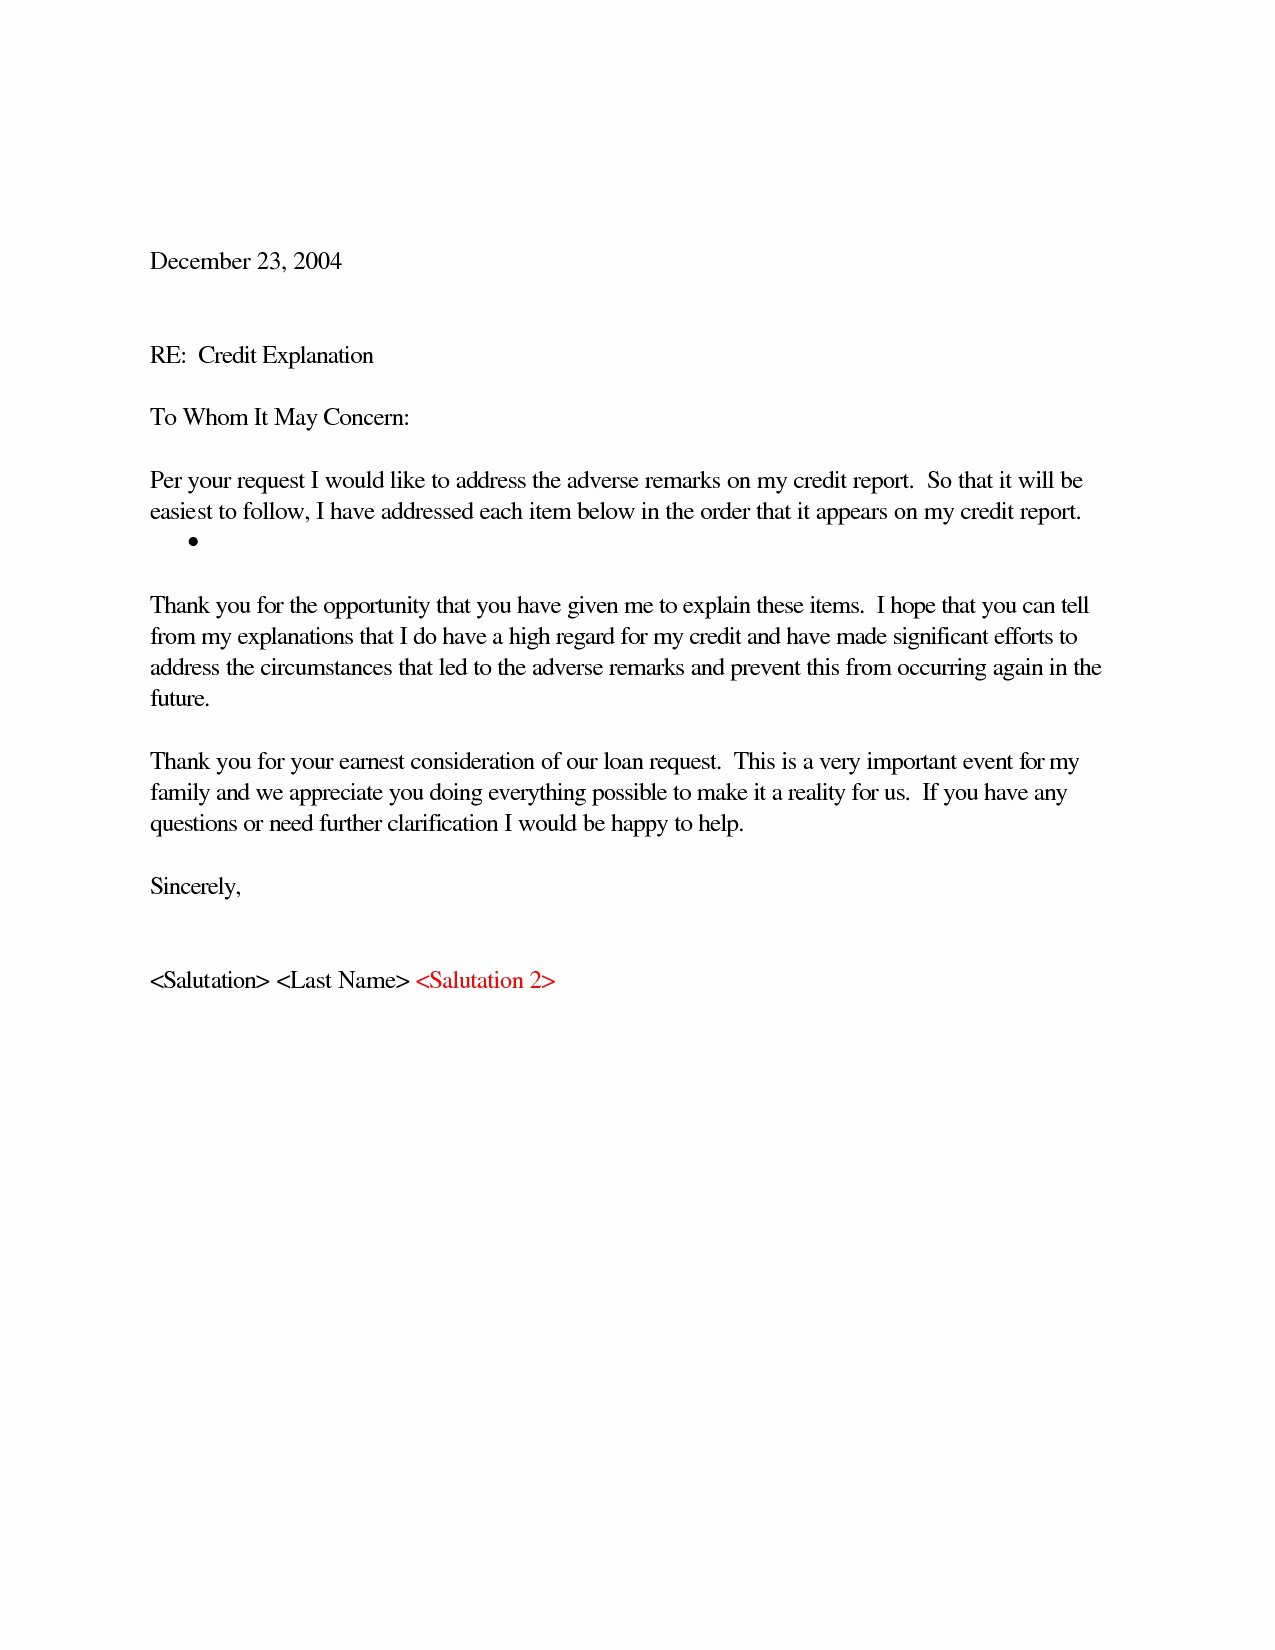 Letter Of Explanation for Mortgage Template Awesome Letter Explanation for Mortgage Word Template Collection